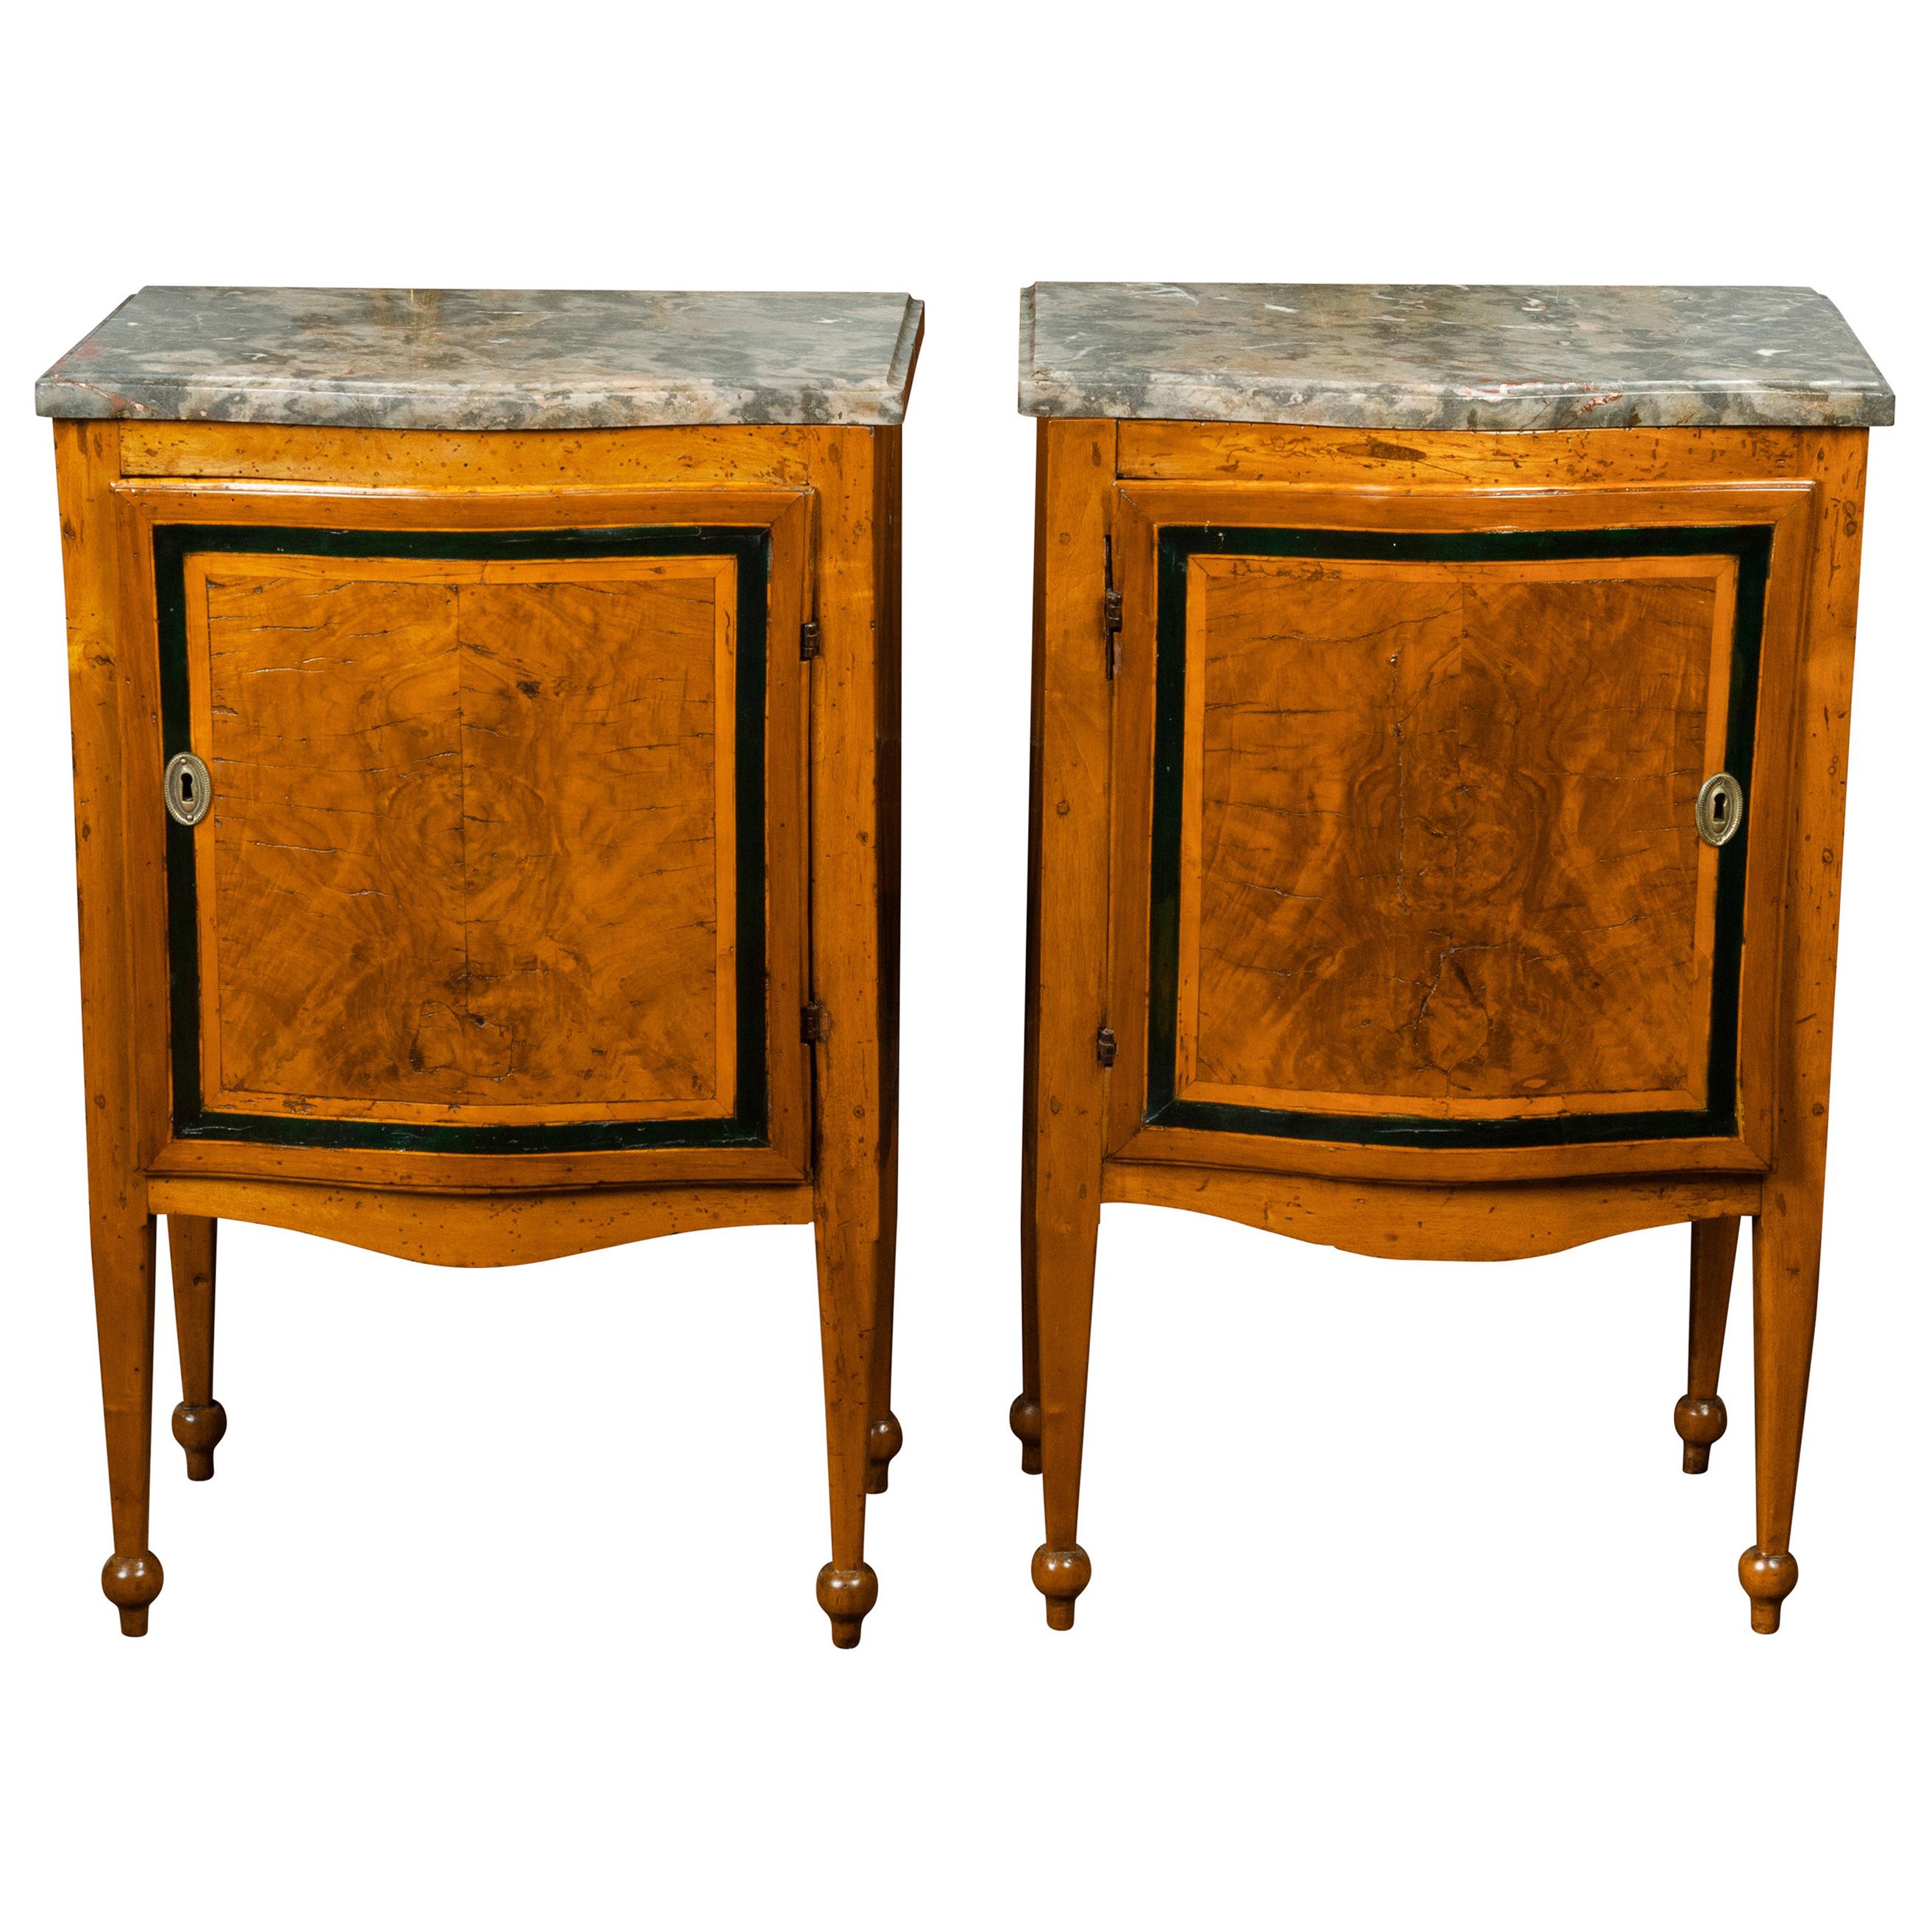 Pair of Italian 1840s Walnut Tables with Variegated Marble Top and Single Door